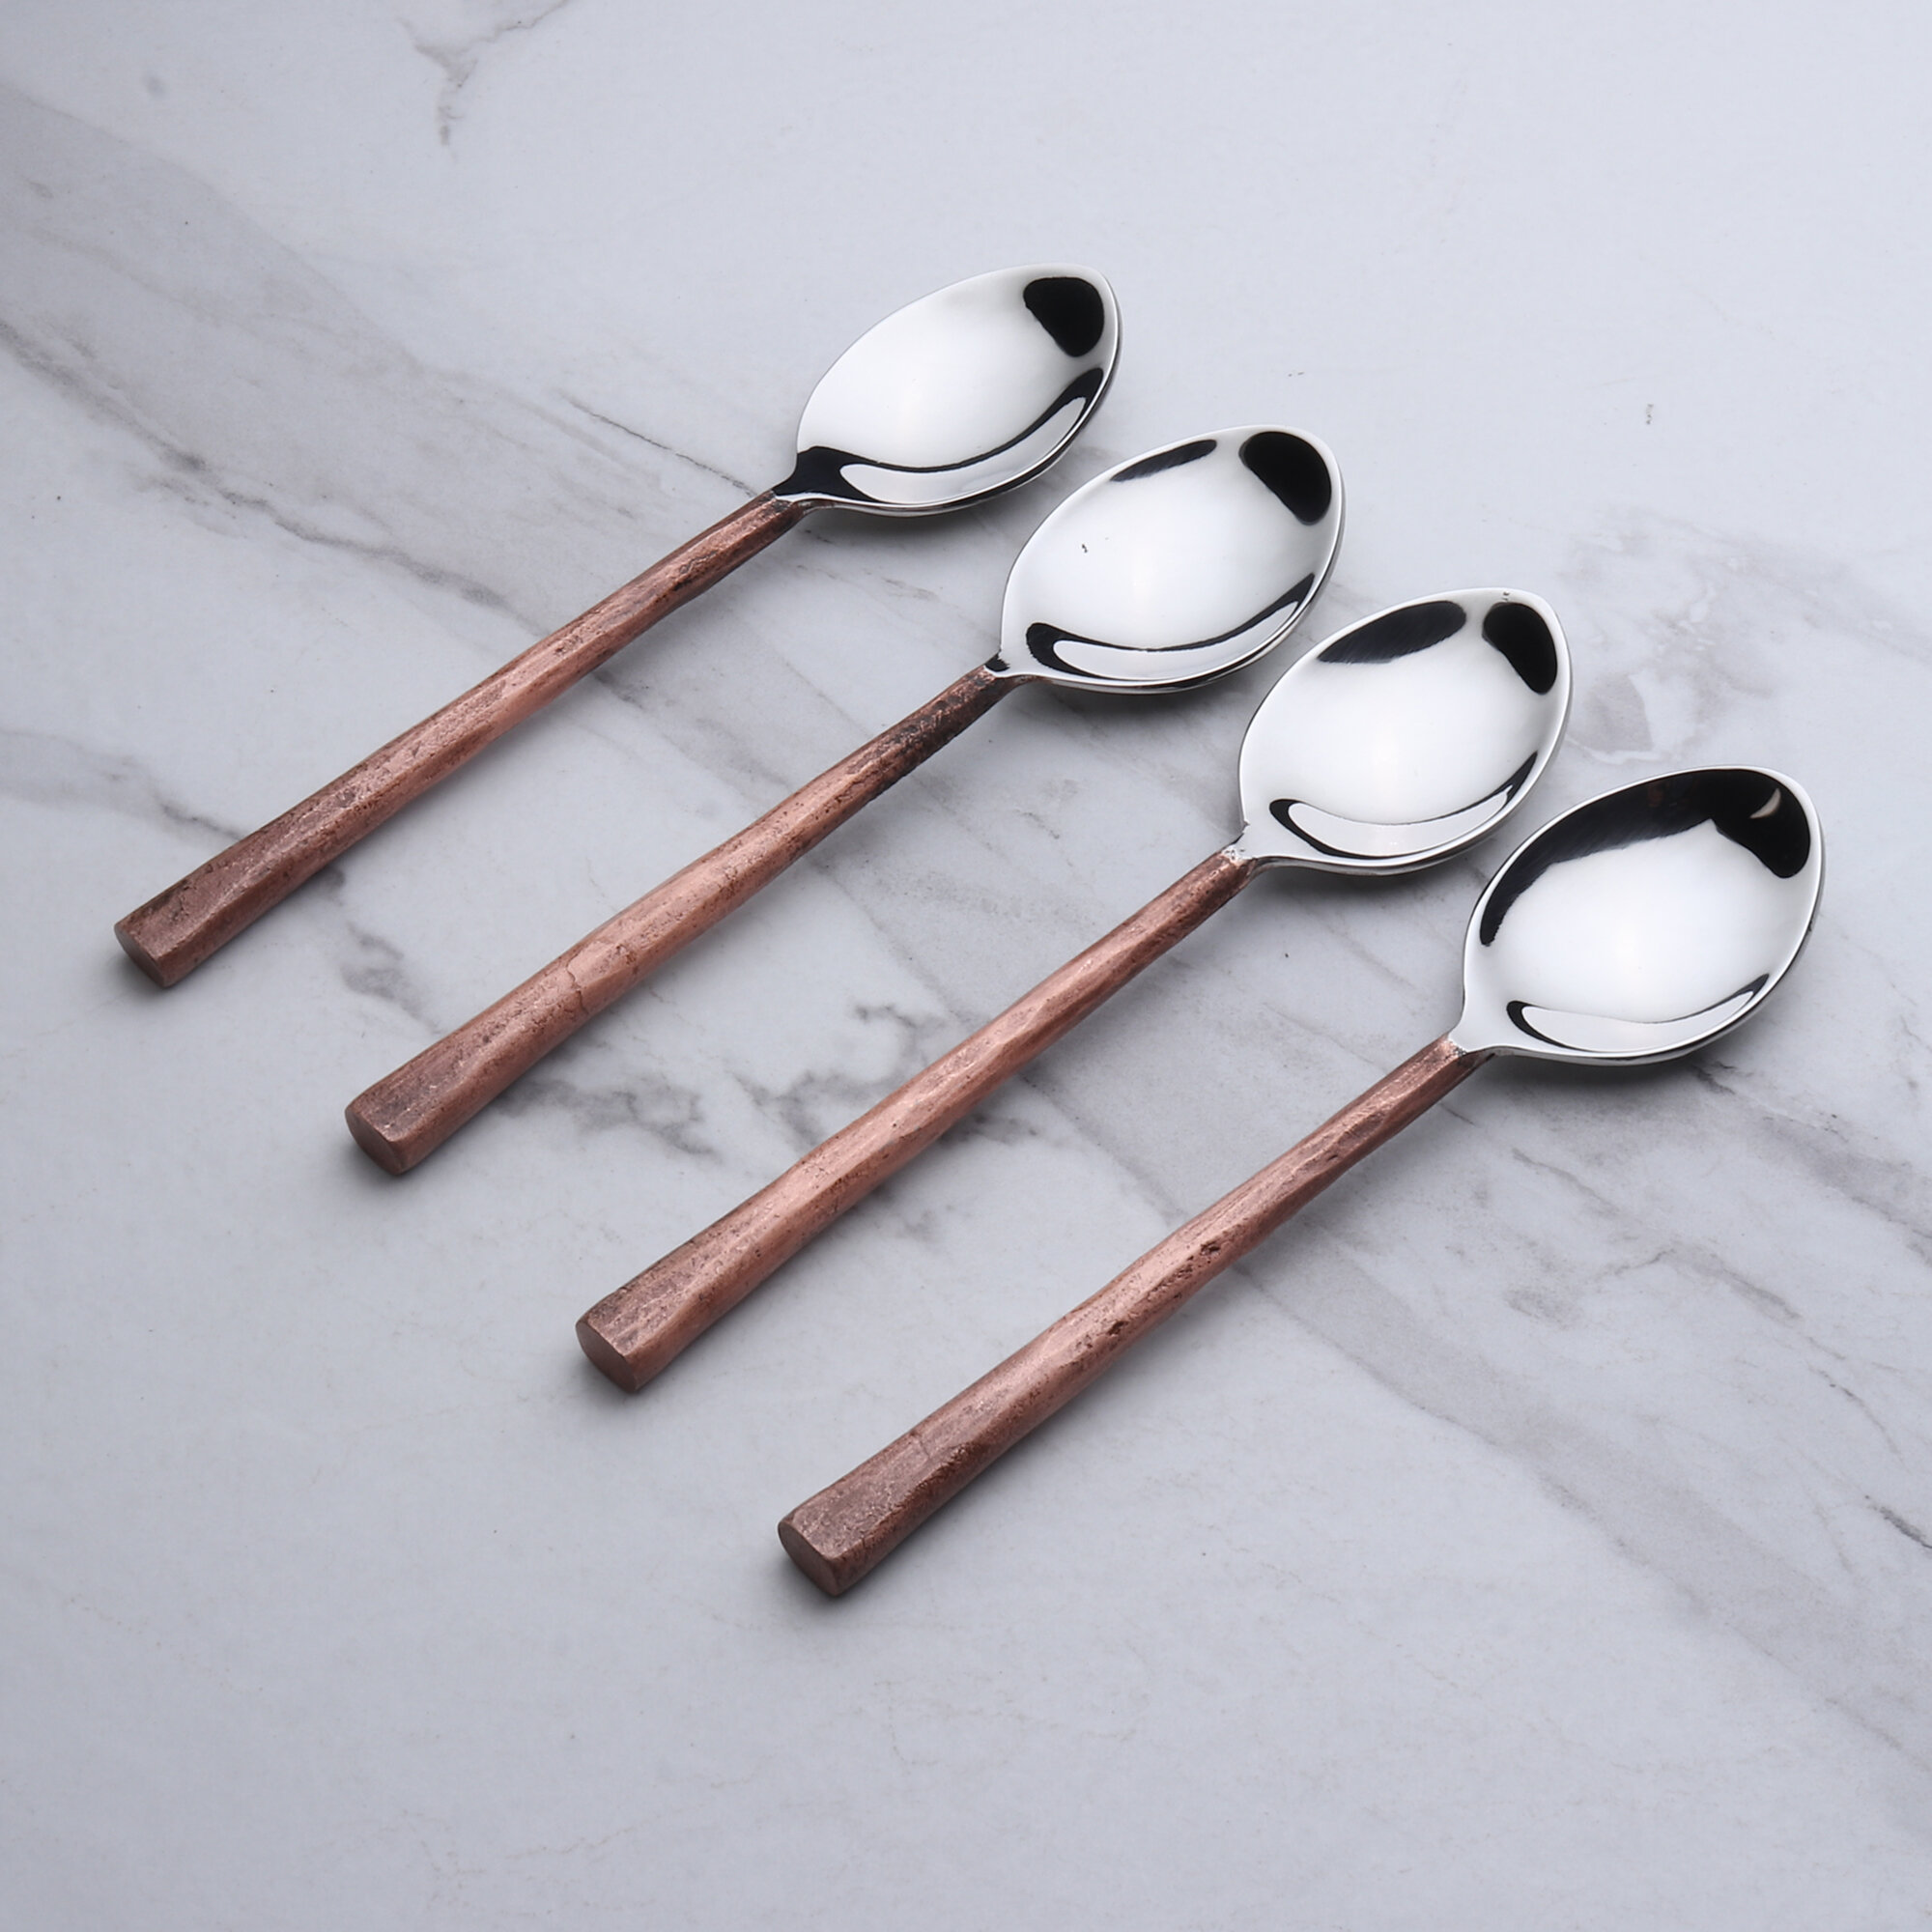 Skull Shaped Sugar Spoon Stainless Steel Gift For Tea Coffee Good Gift 4PC 